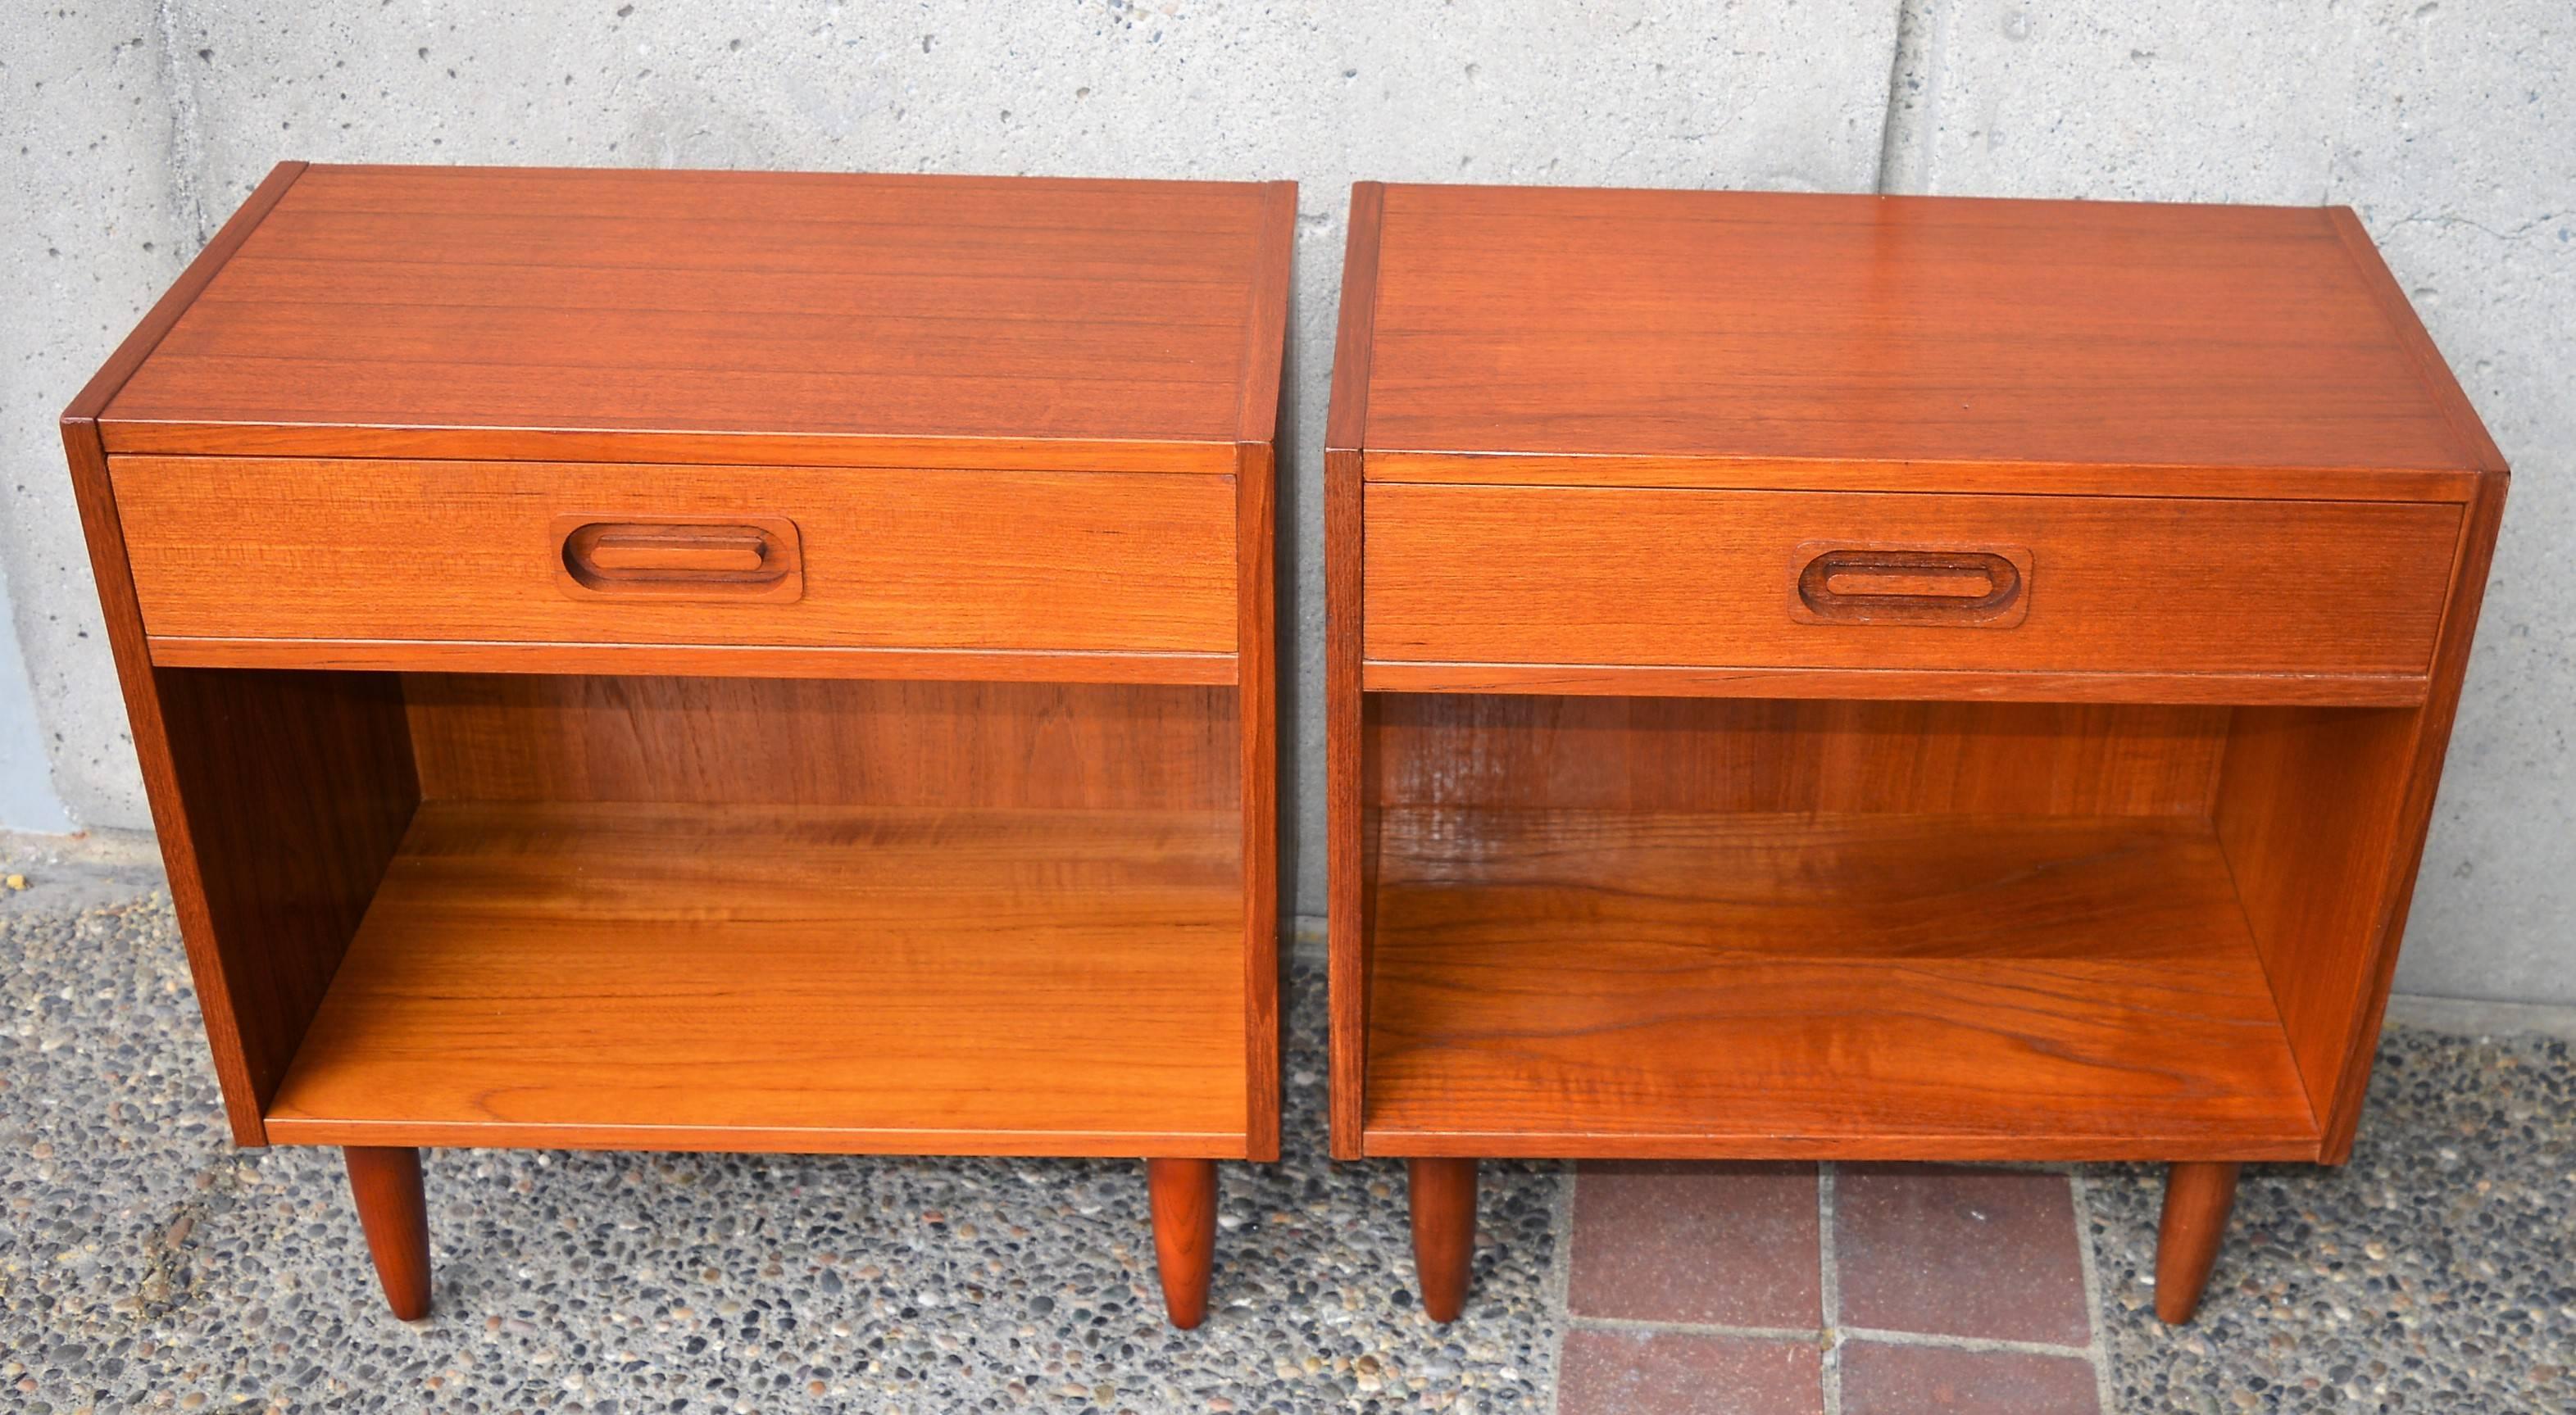 Pair of Danish Teak One Drawer & Cubby Nightstands or Bedside Tables by Dyrlund 2